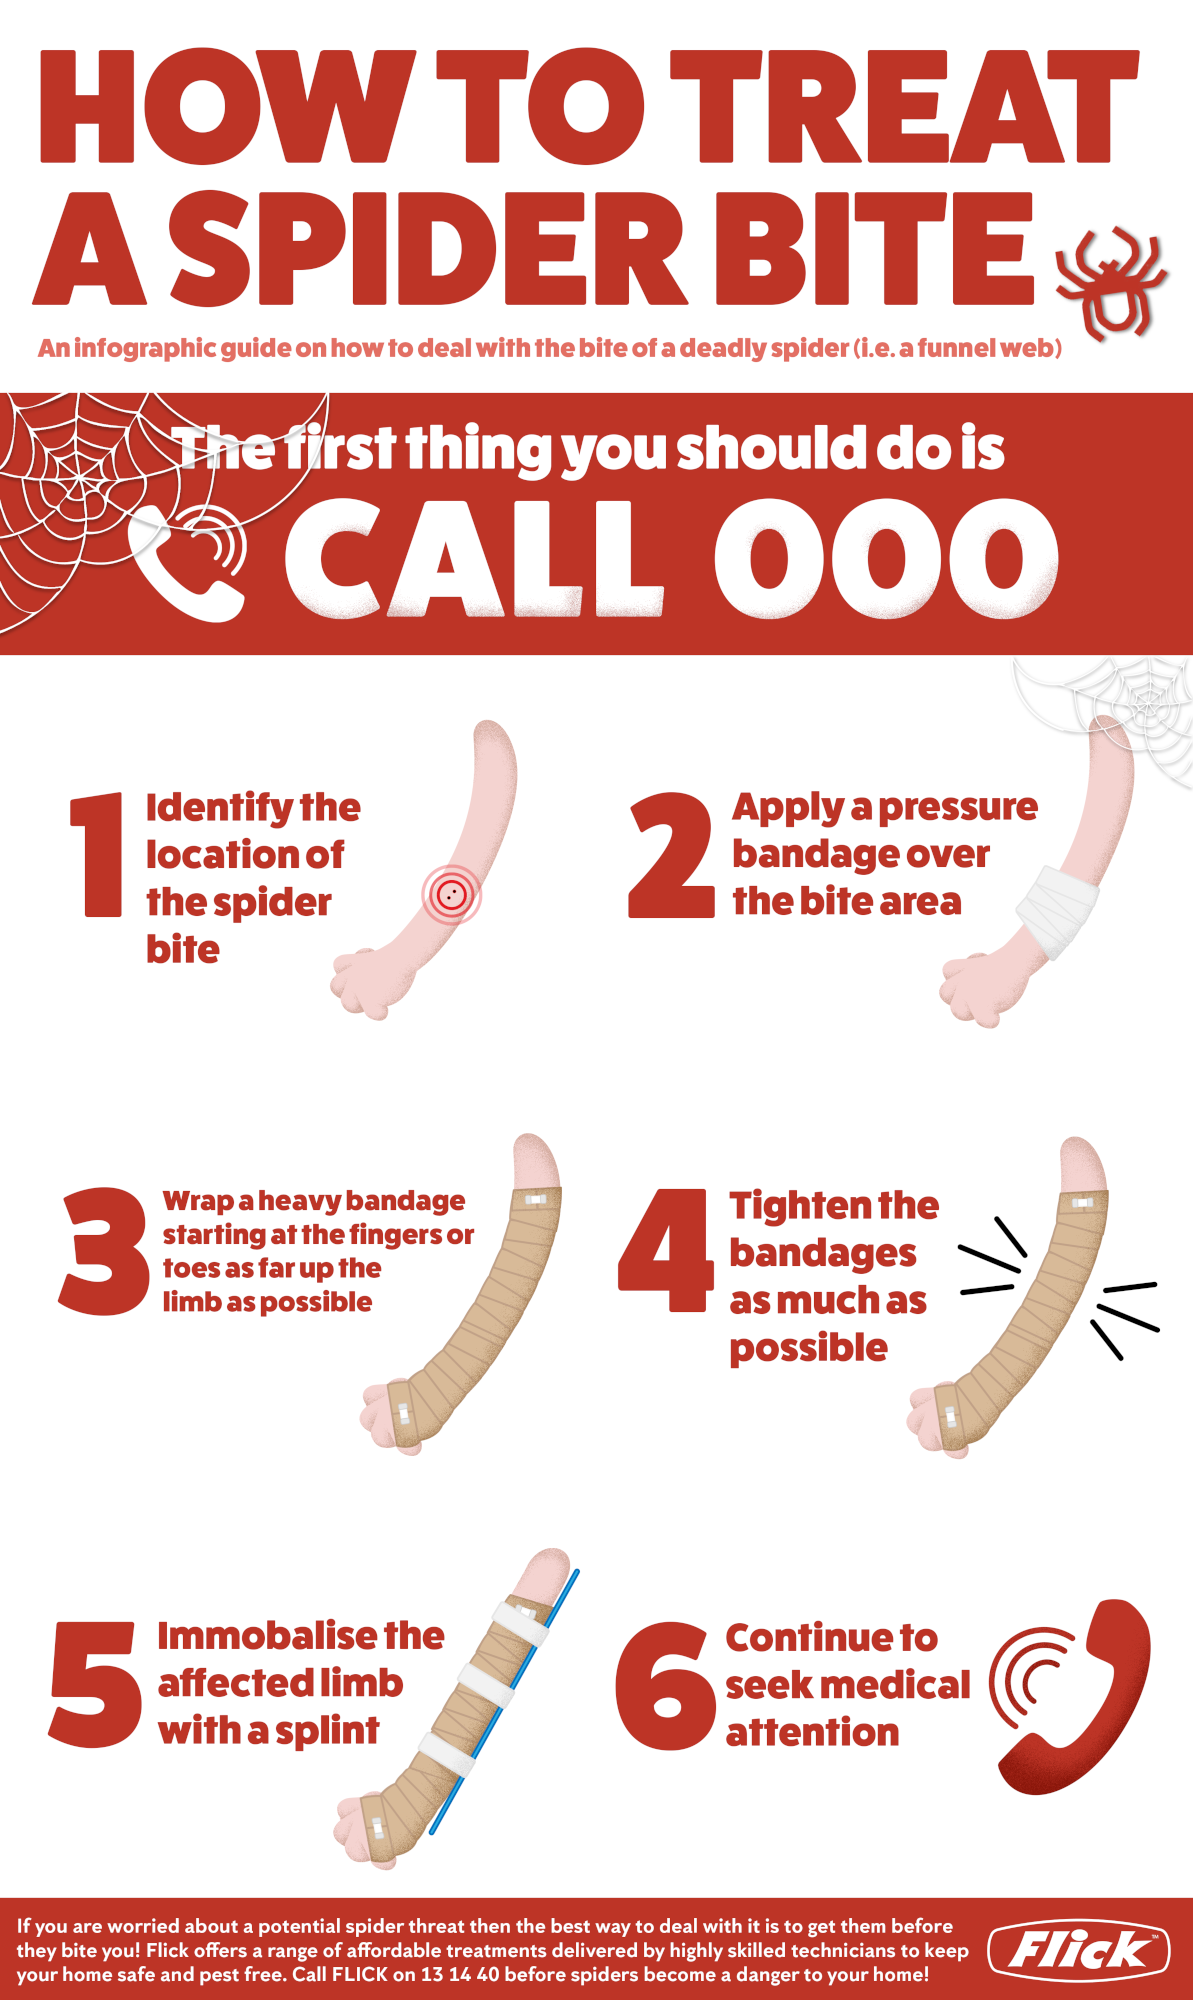 How to treat a spider bite infographic